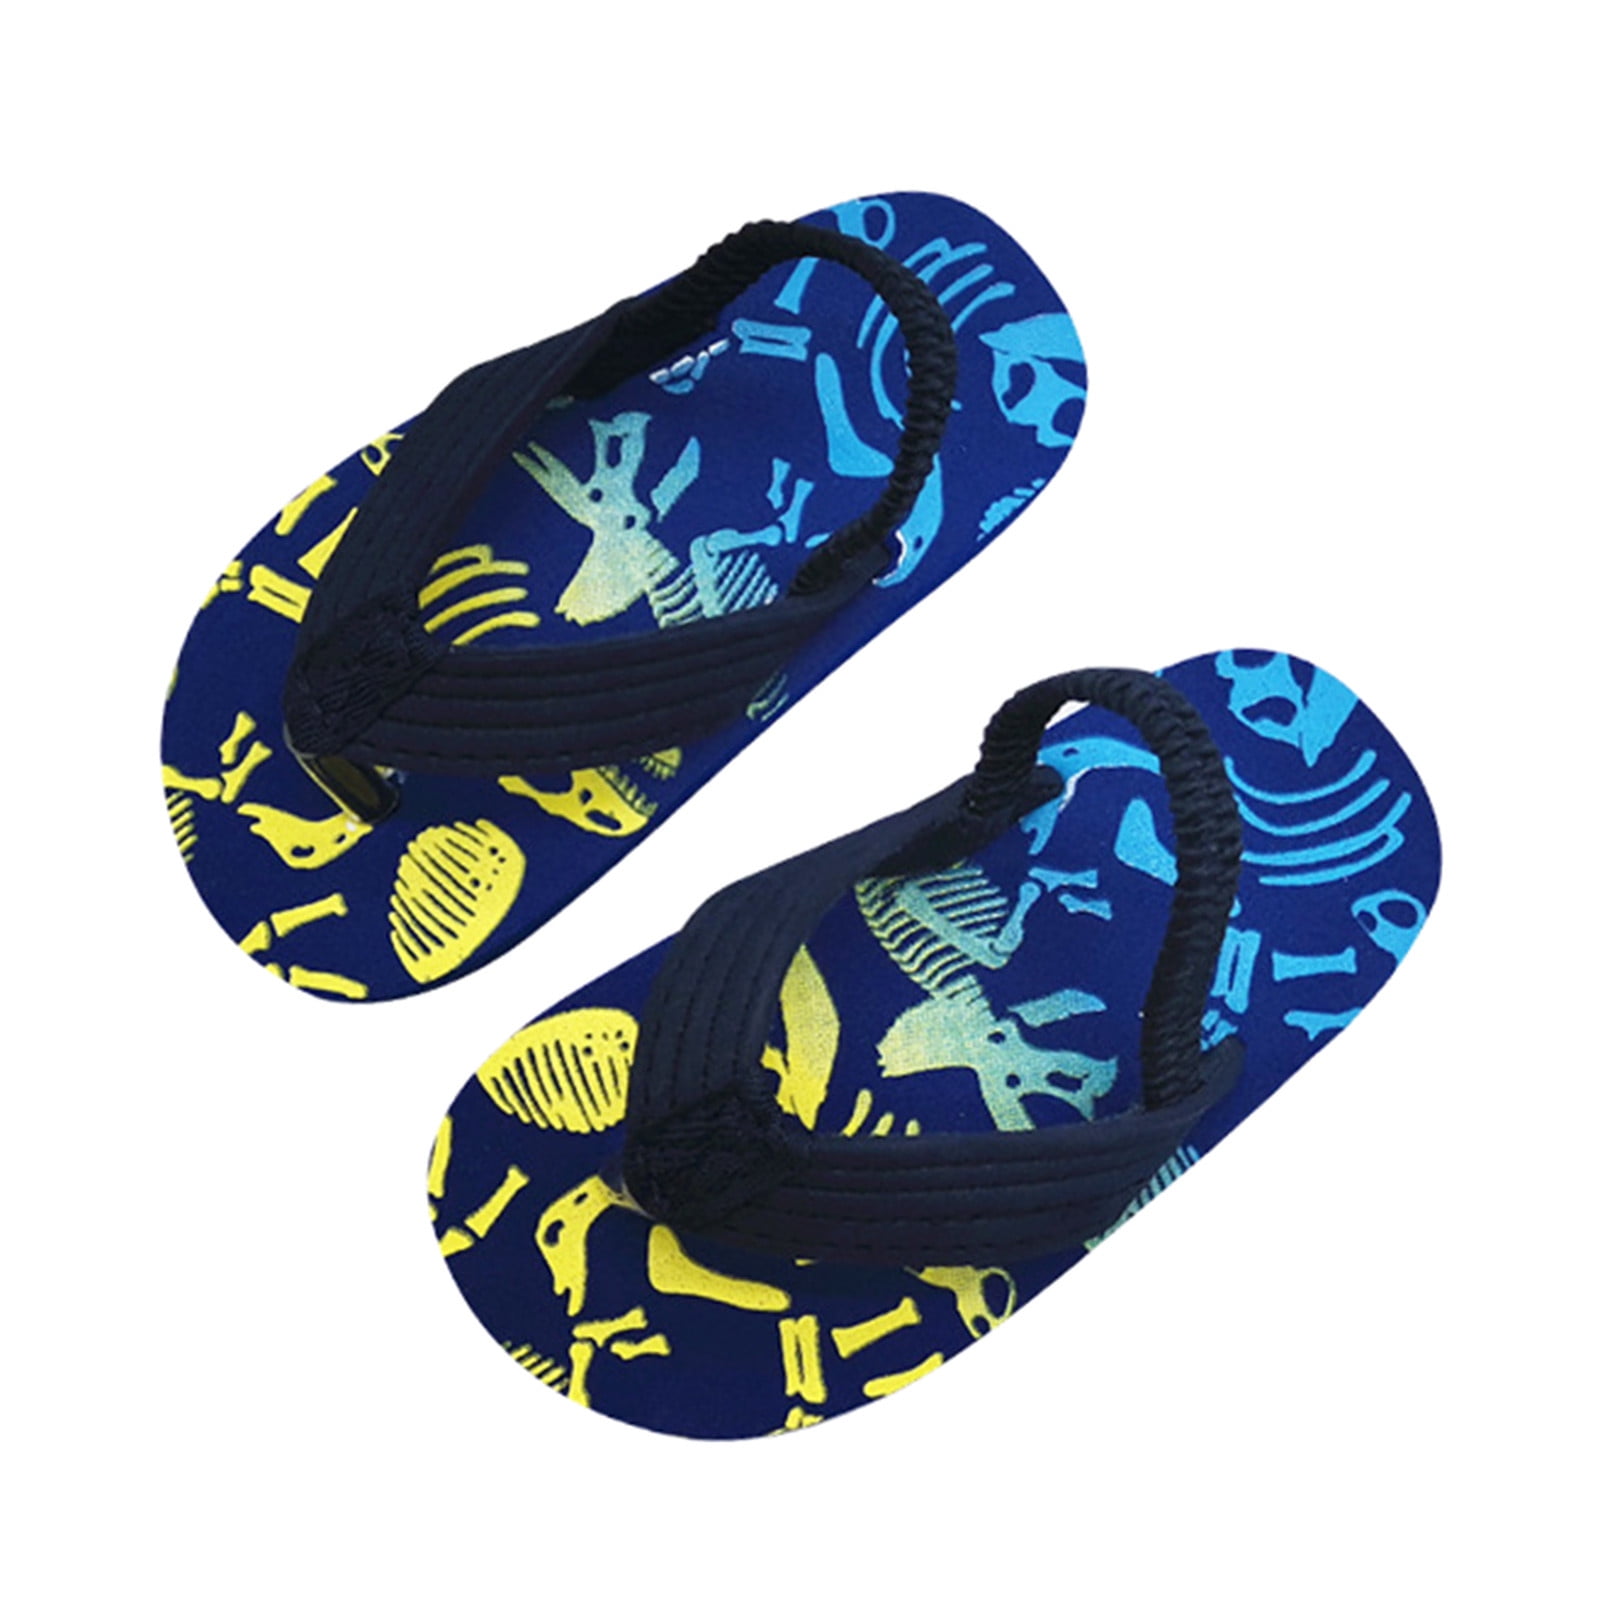 Nickelodeon® Paw Patrol Boys Flip Flops Sandals Slippers Shoes UK Sizes 5 to 11 